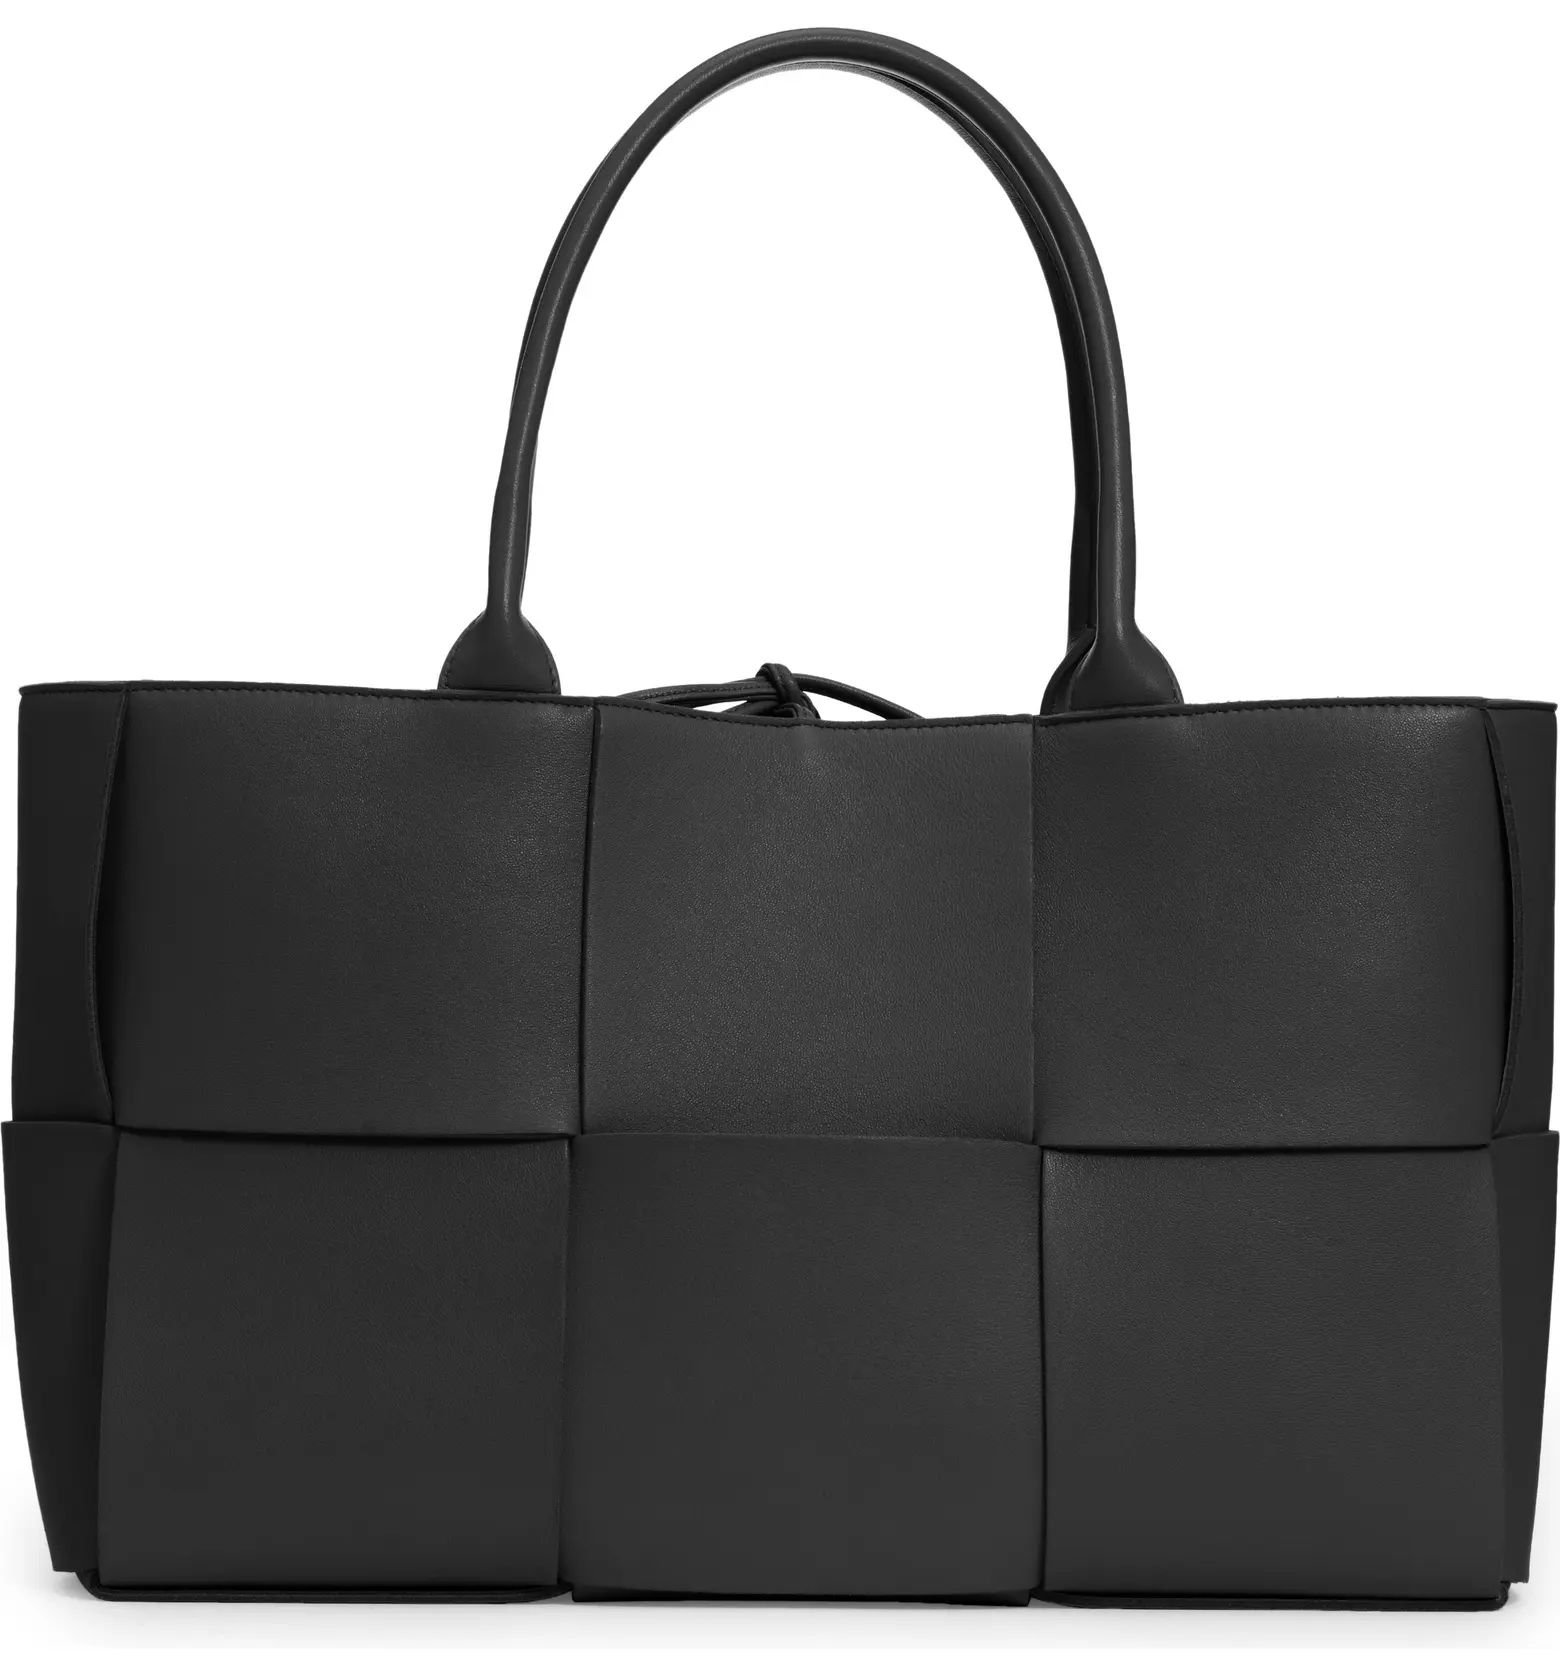 Medium Arco Woven Leather Tote | Nordstrom